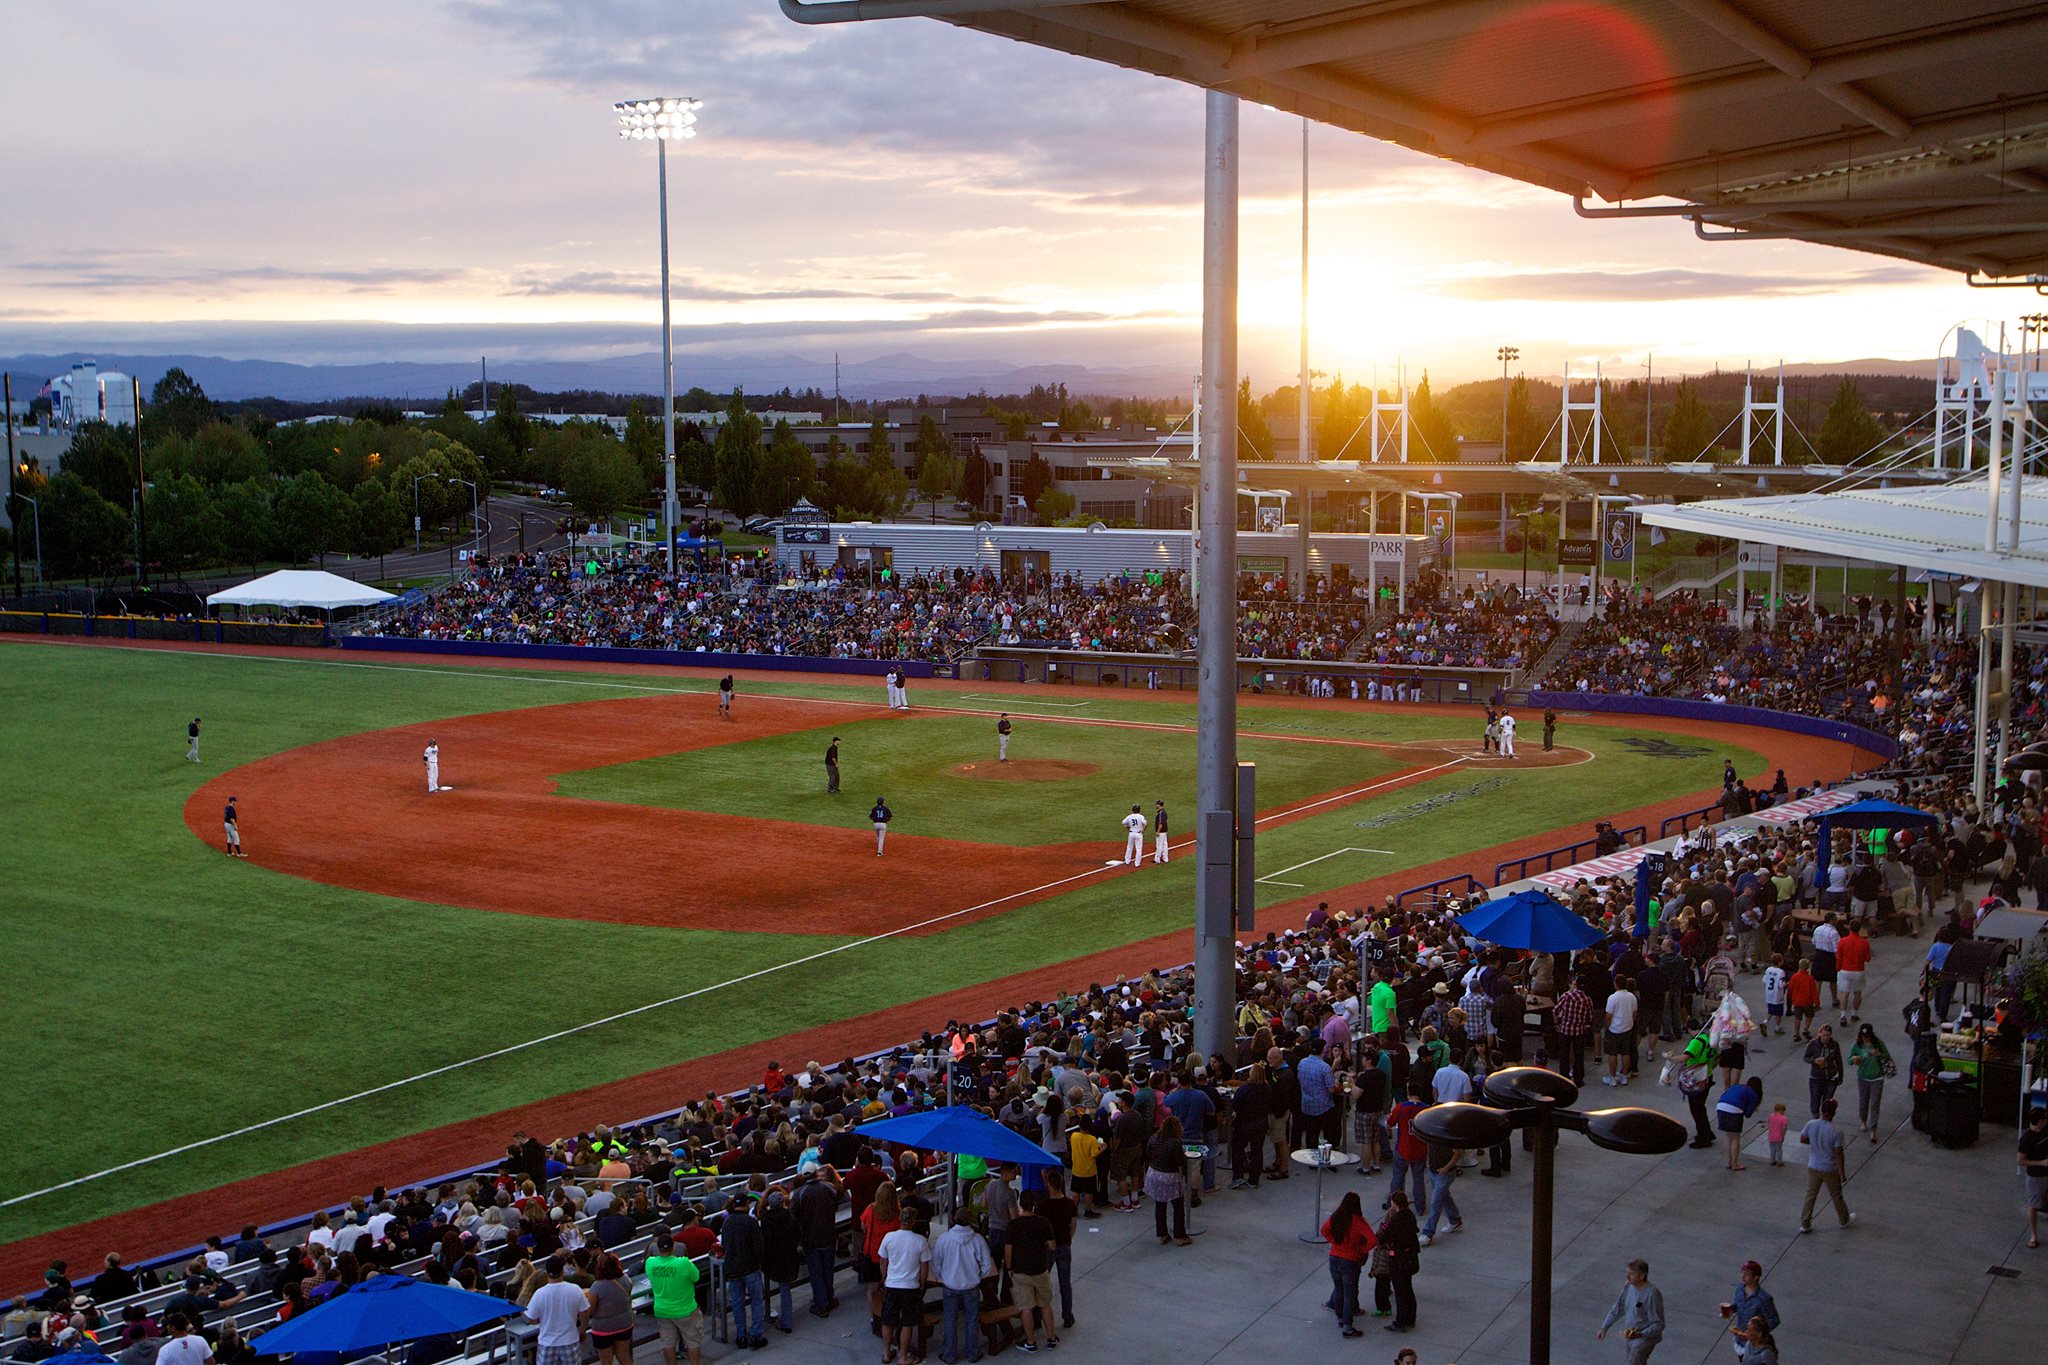 Hops pitch $40-$100M Ron Tonkin Field upgrades